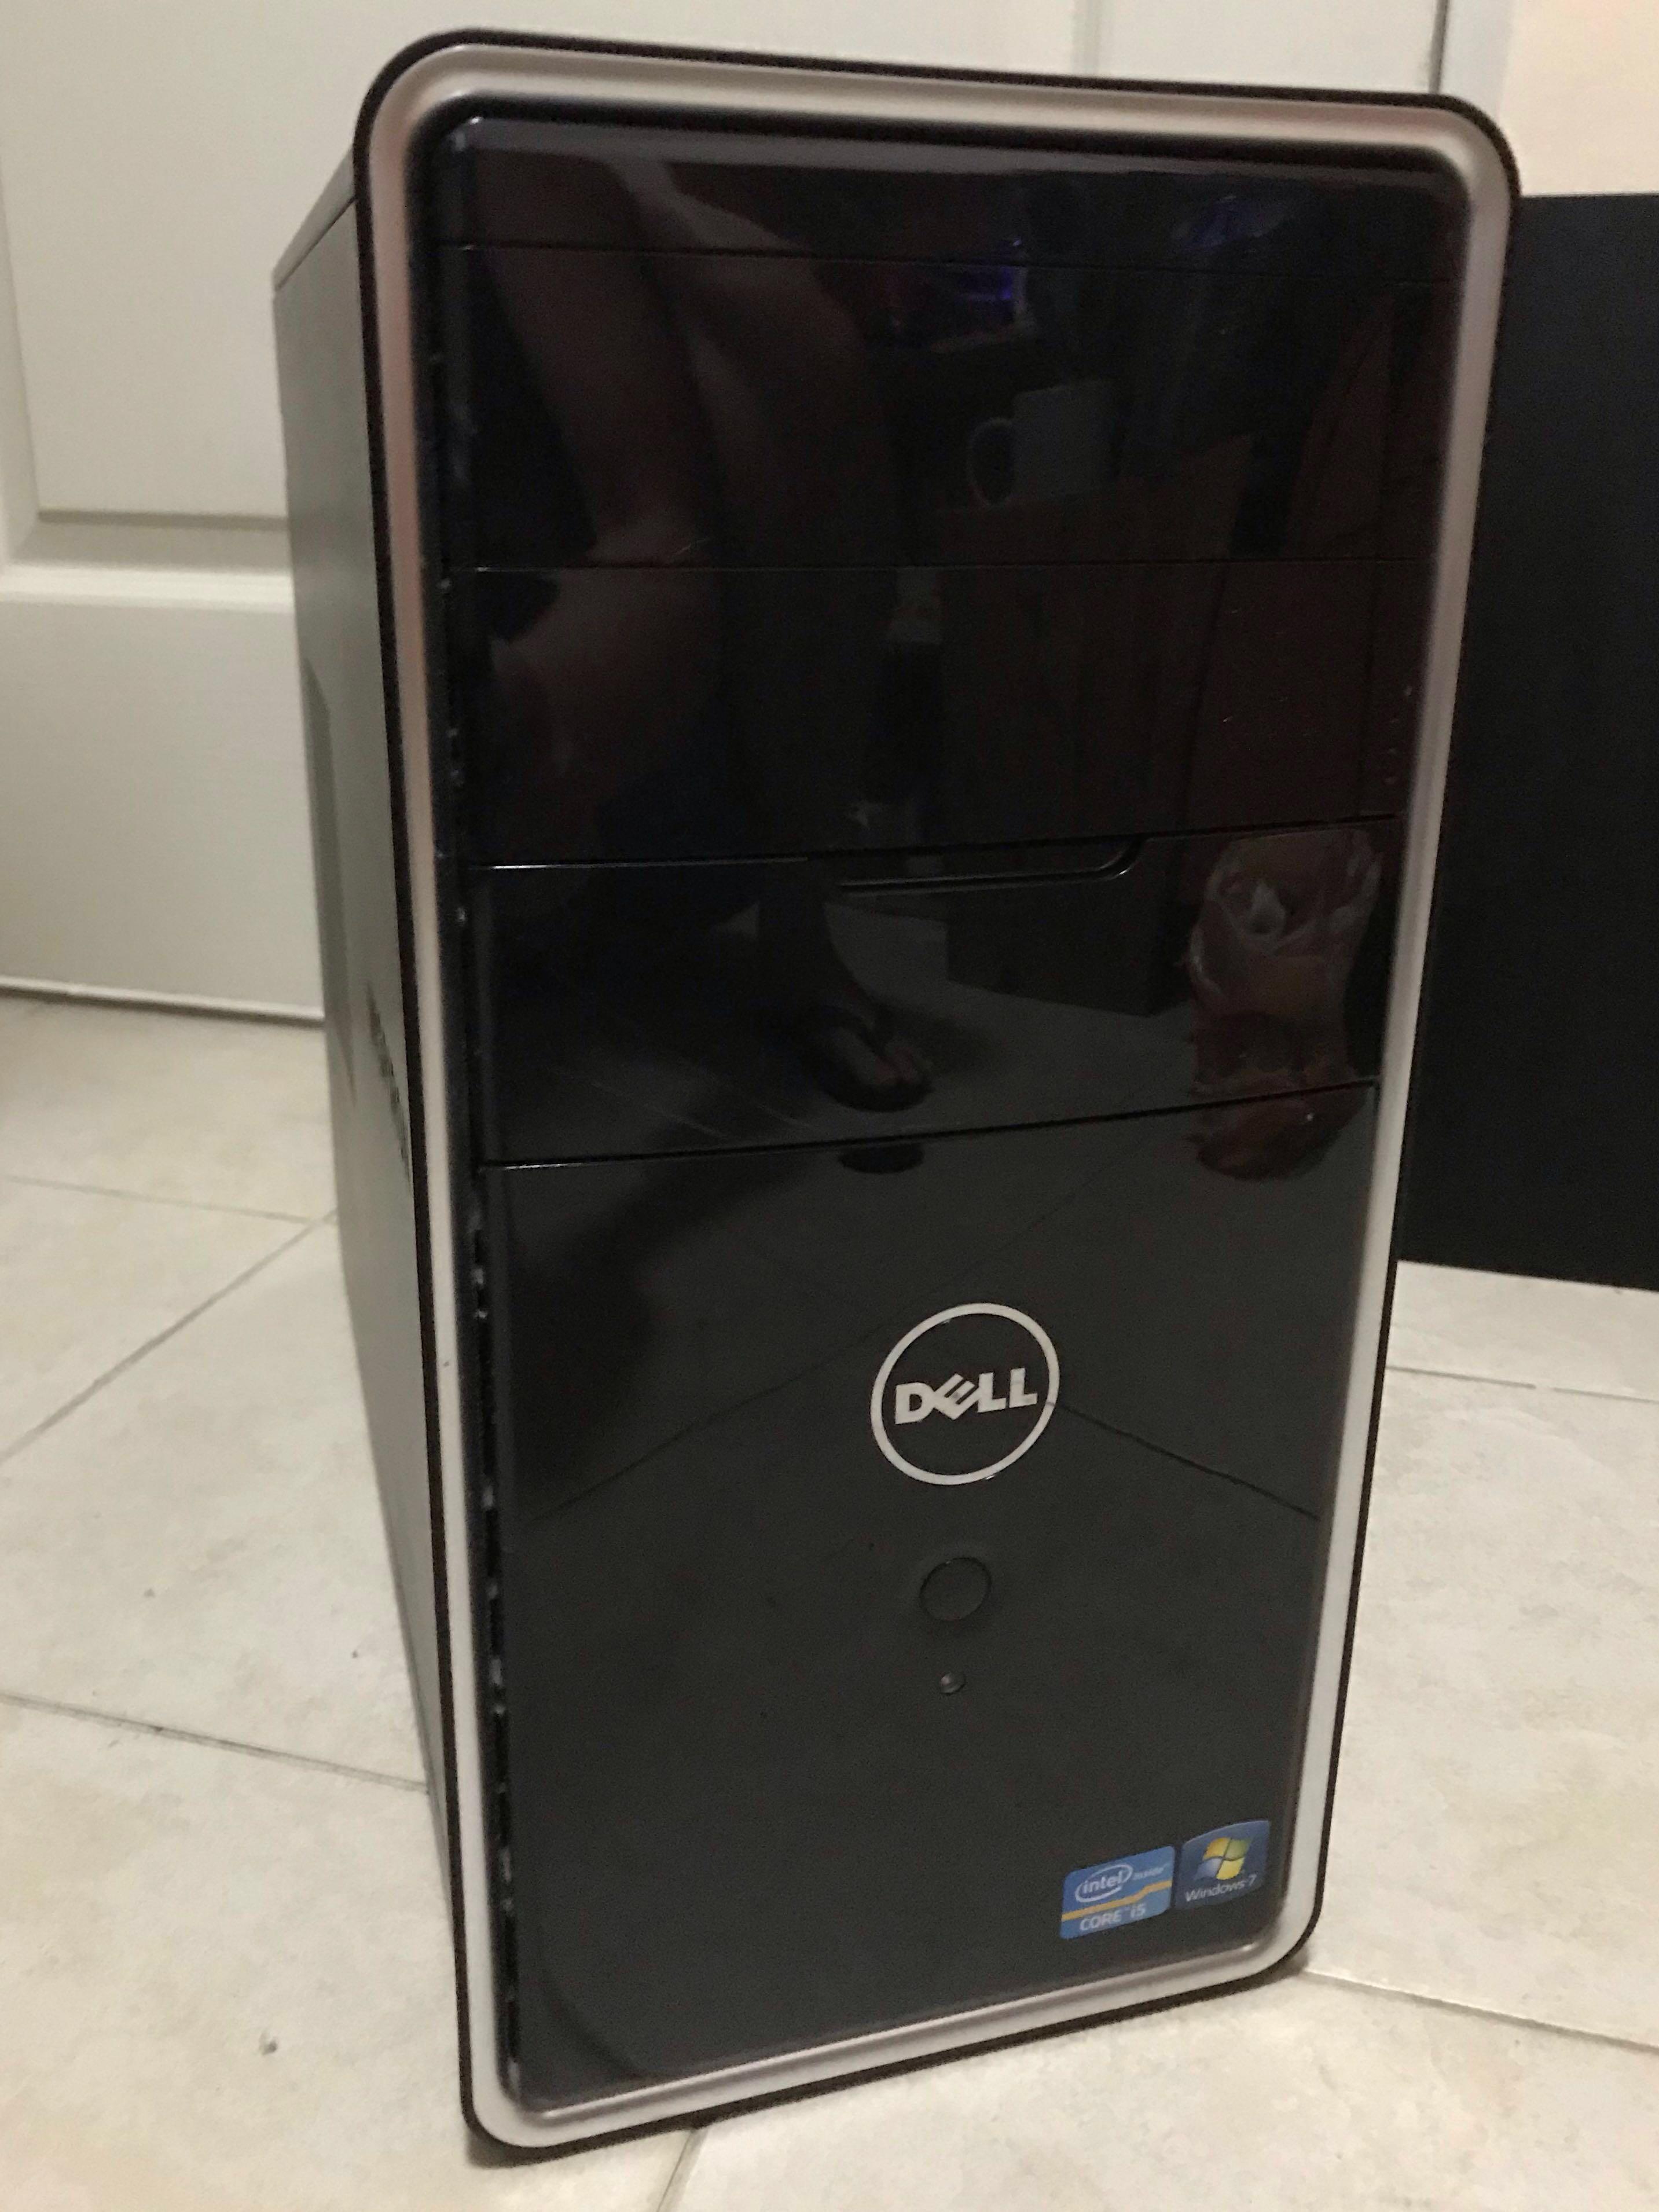 Dell Inspiron 6 Core I5 3 00ghz Electronics Computers Desktops On Carousell